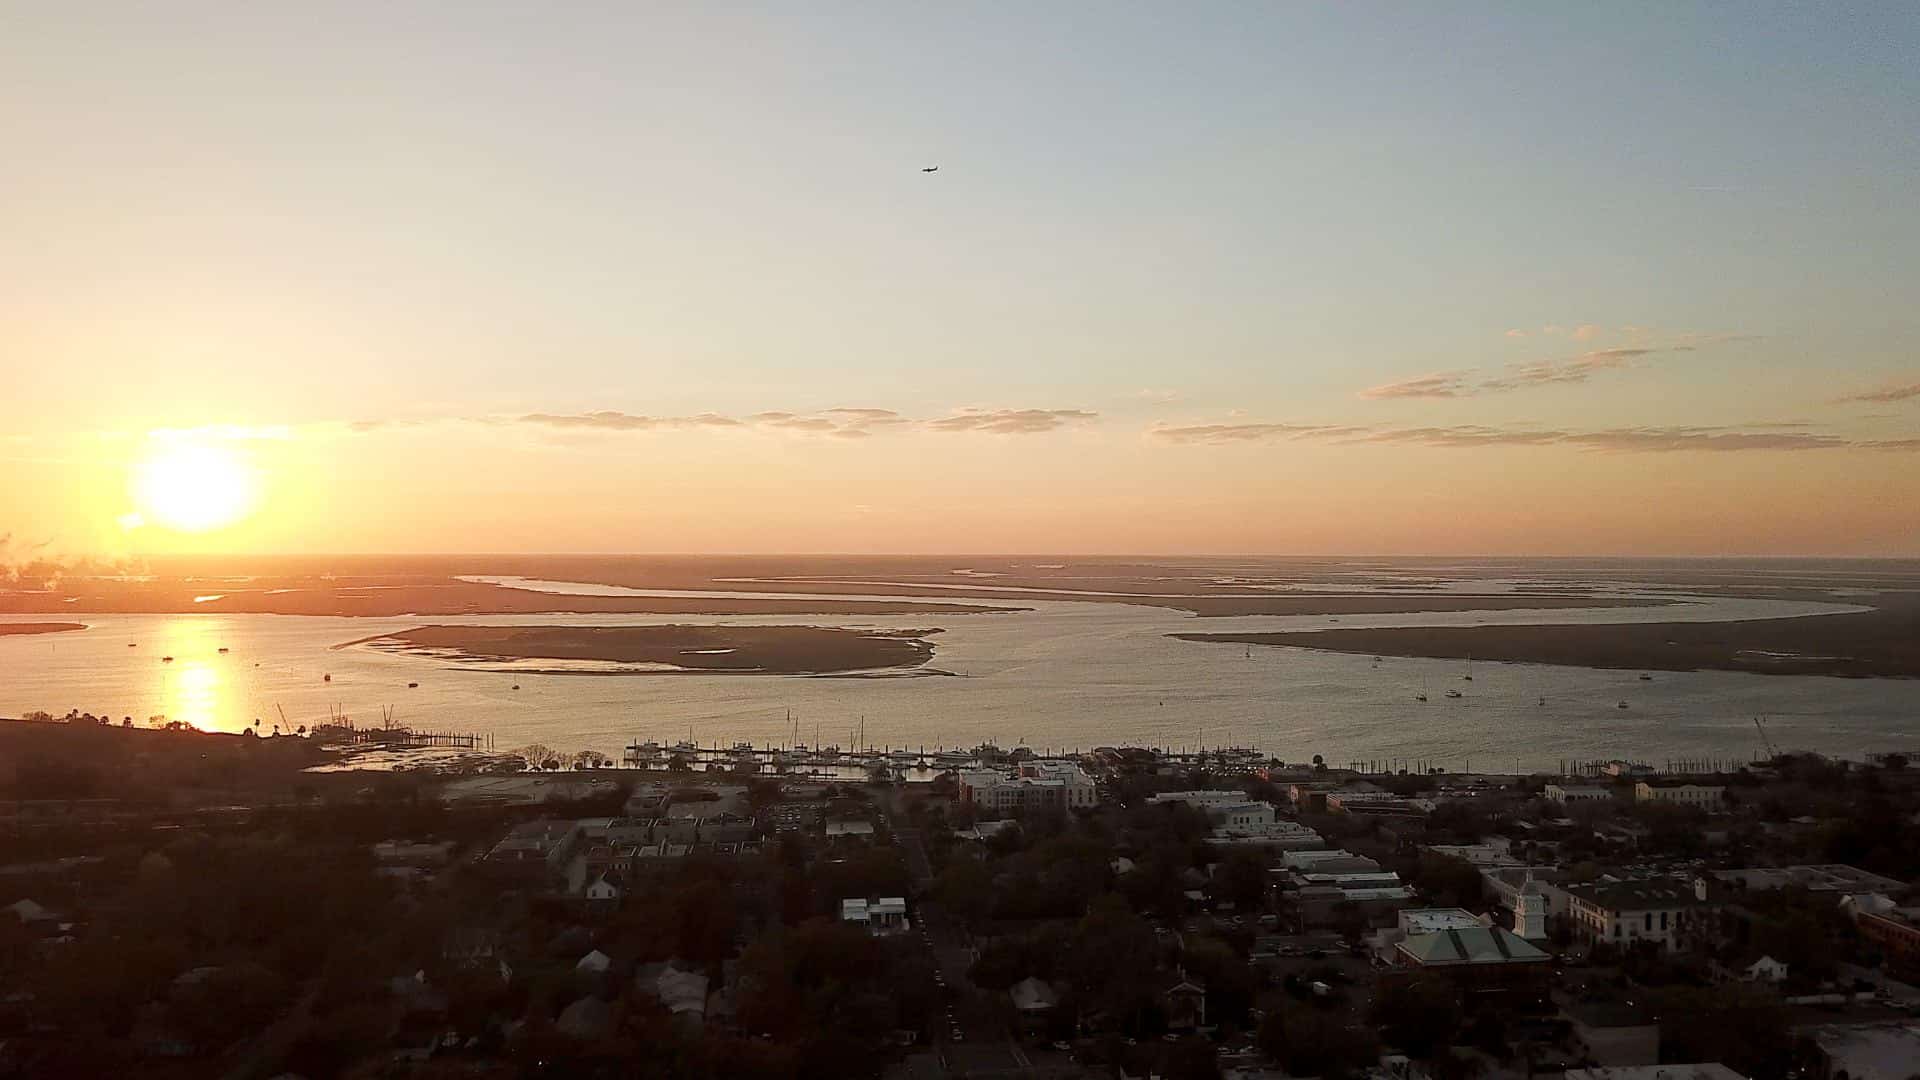 Aerial view of a town near the water with the sun setting in the background